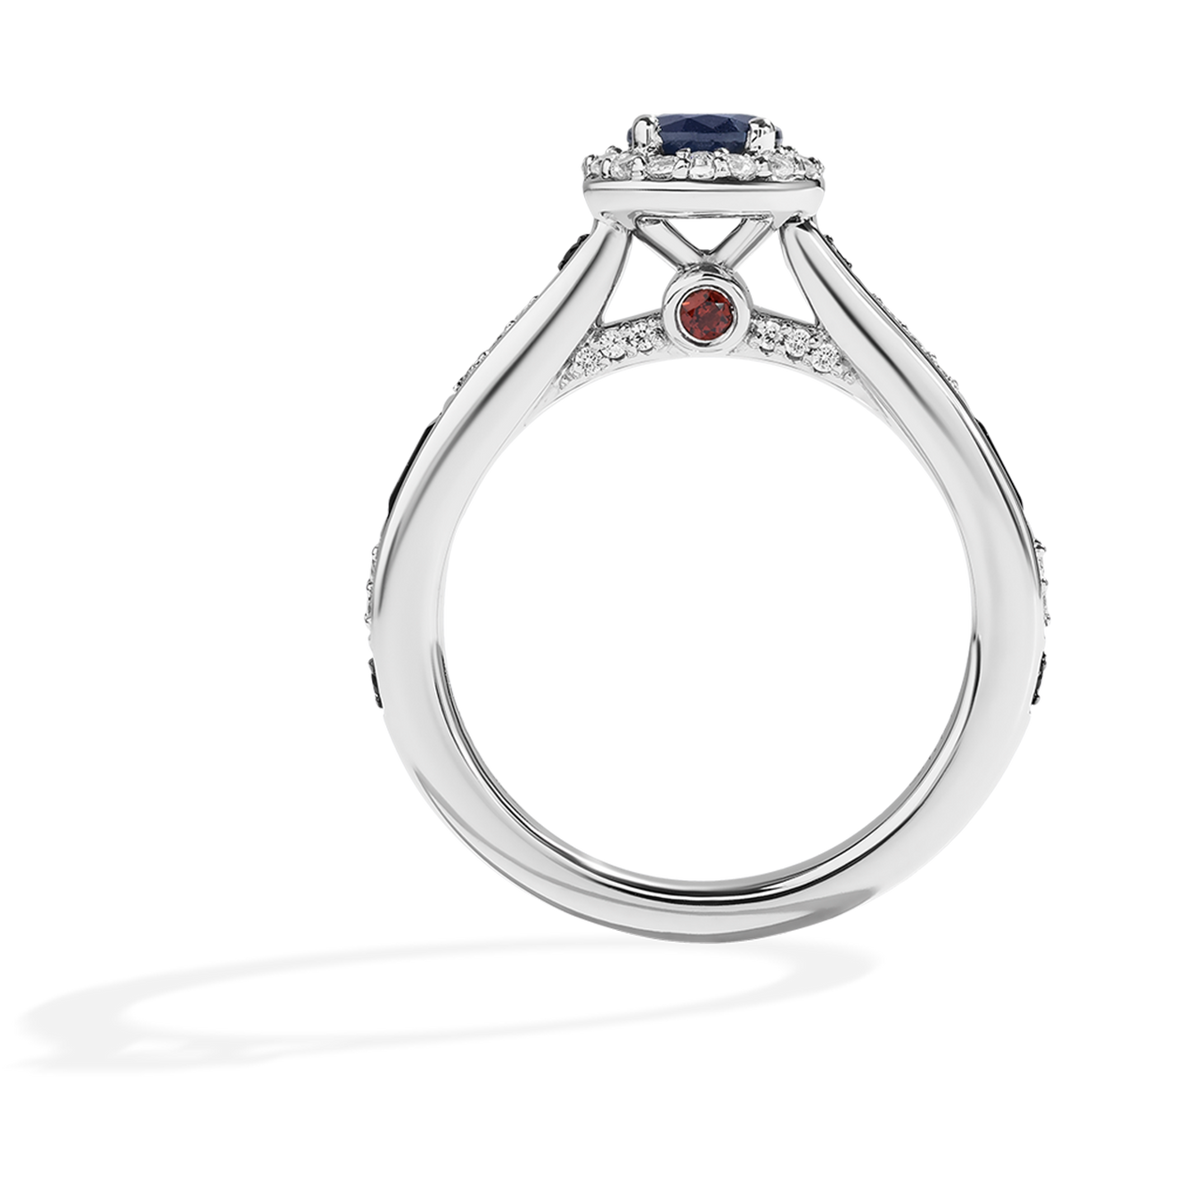 Star Wars™ R2-D2 Halo Engagement Ring 14K White Gold with Diamonds